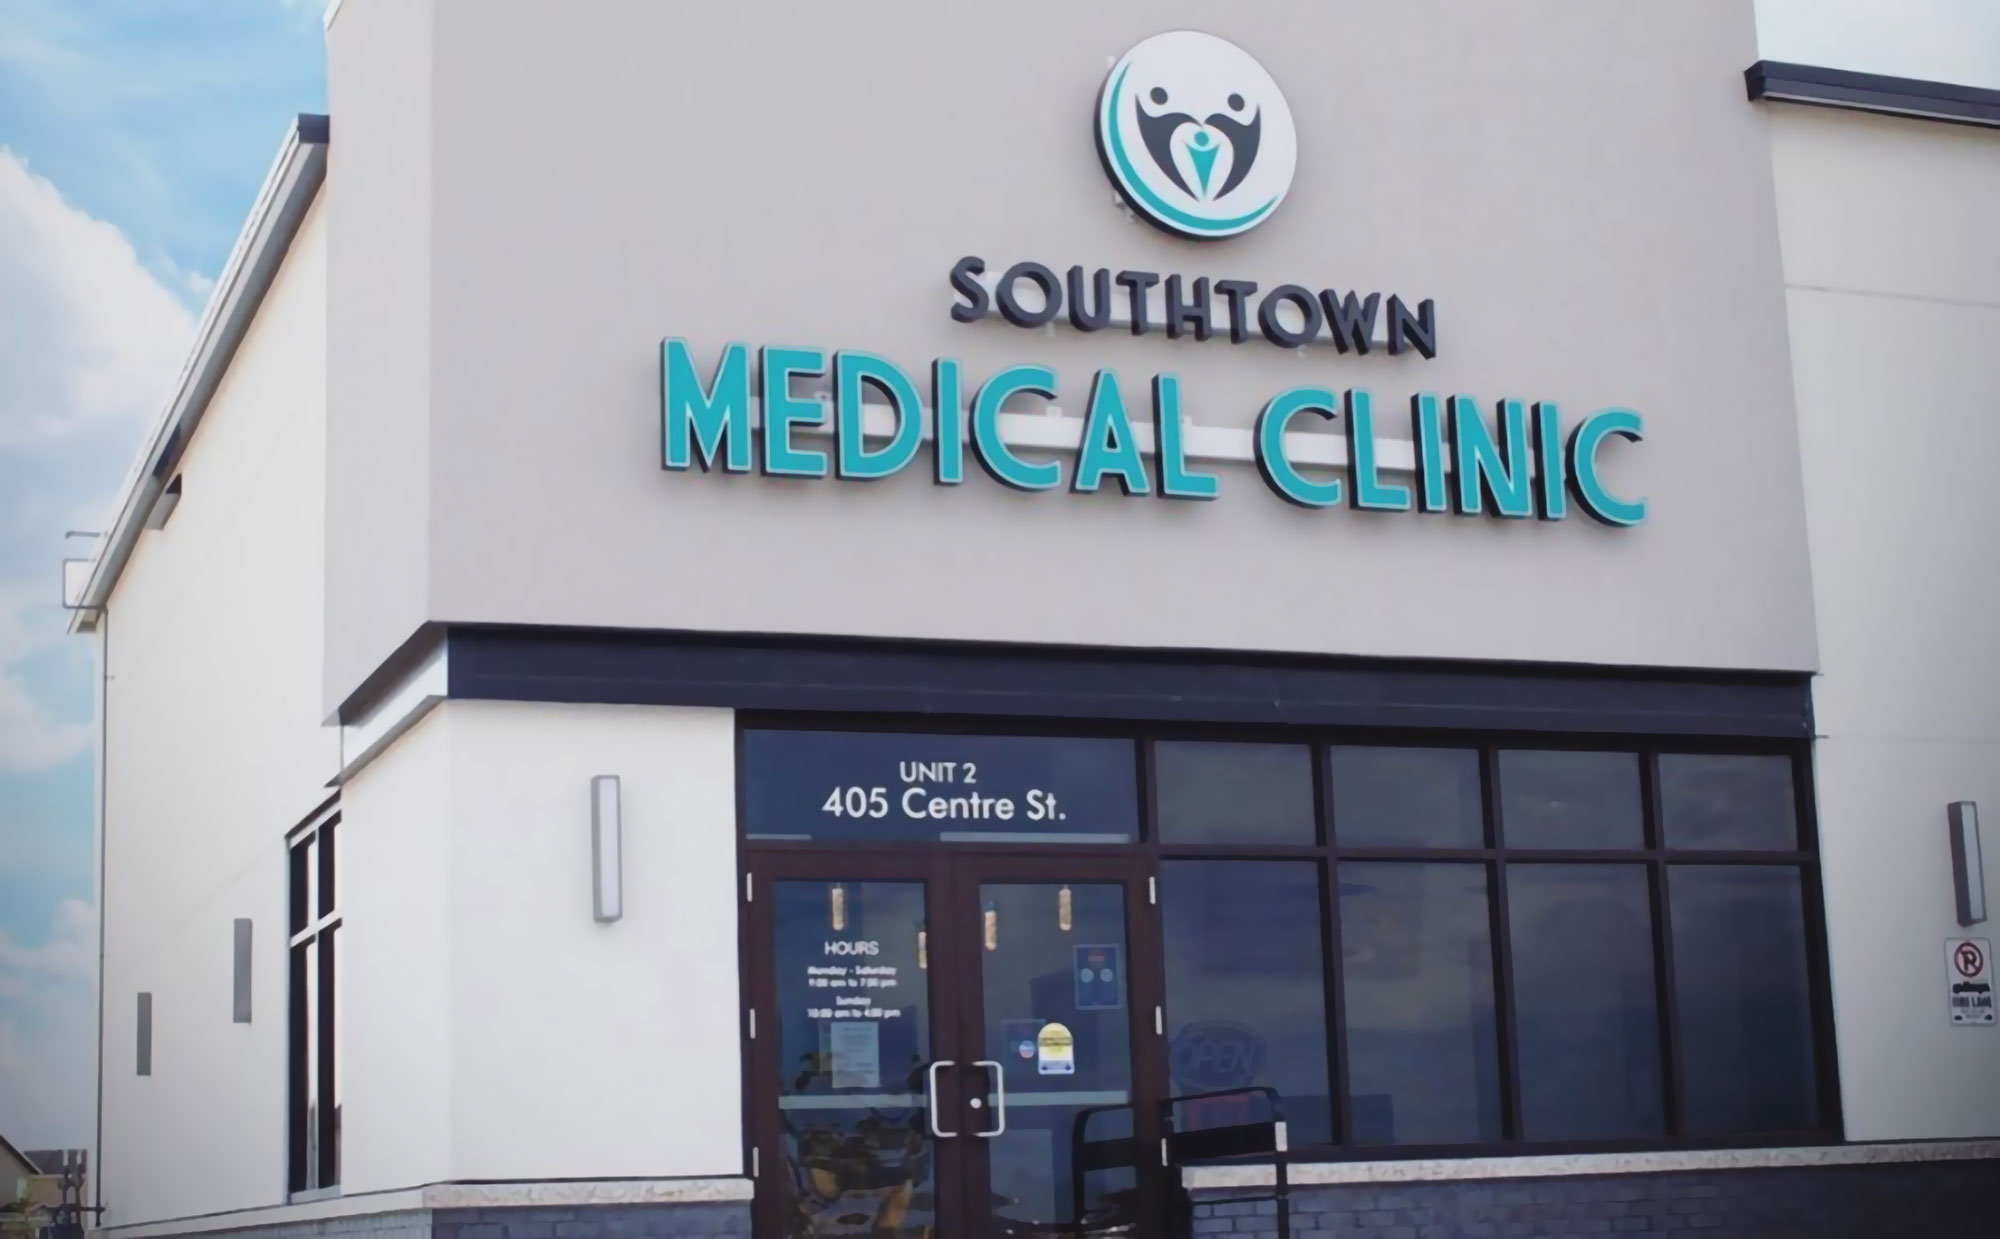 Southtown Medical Clinic